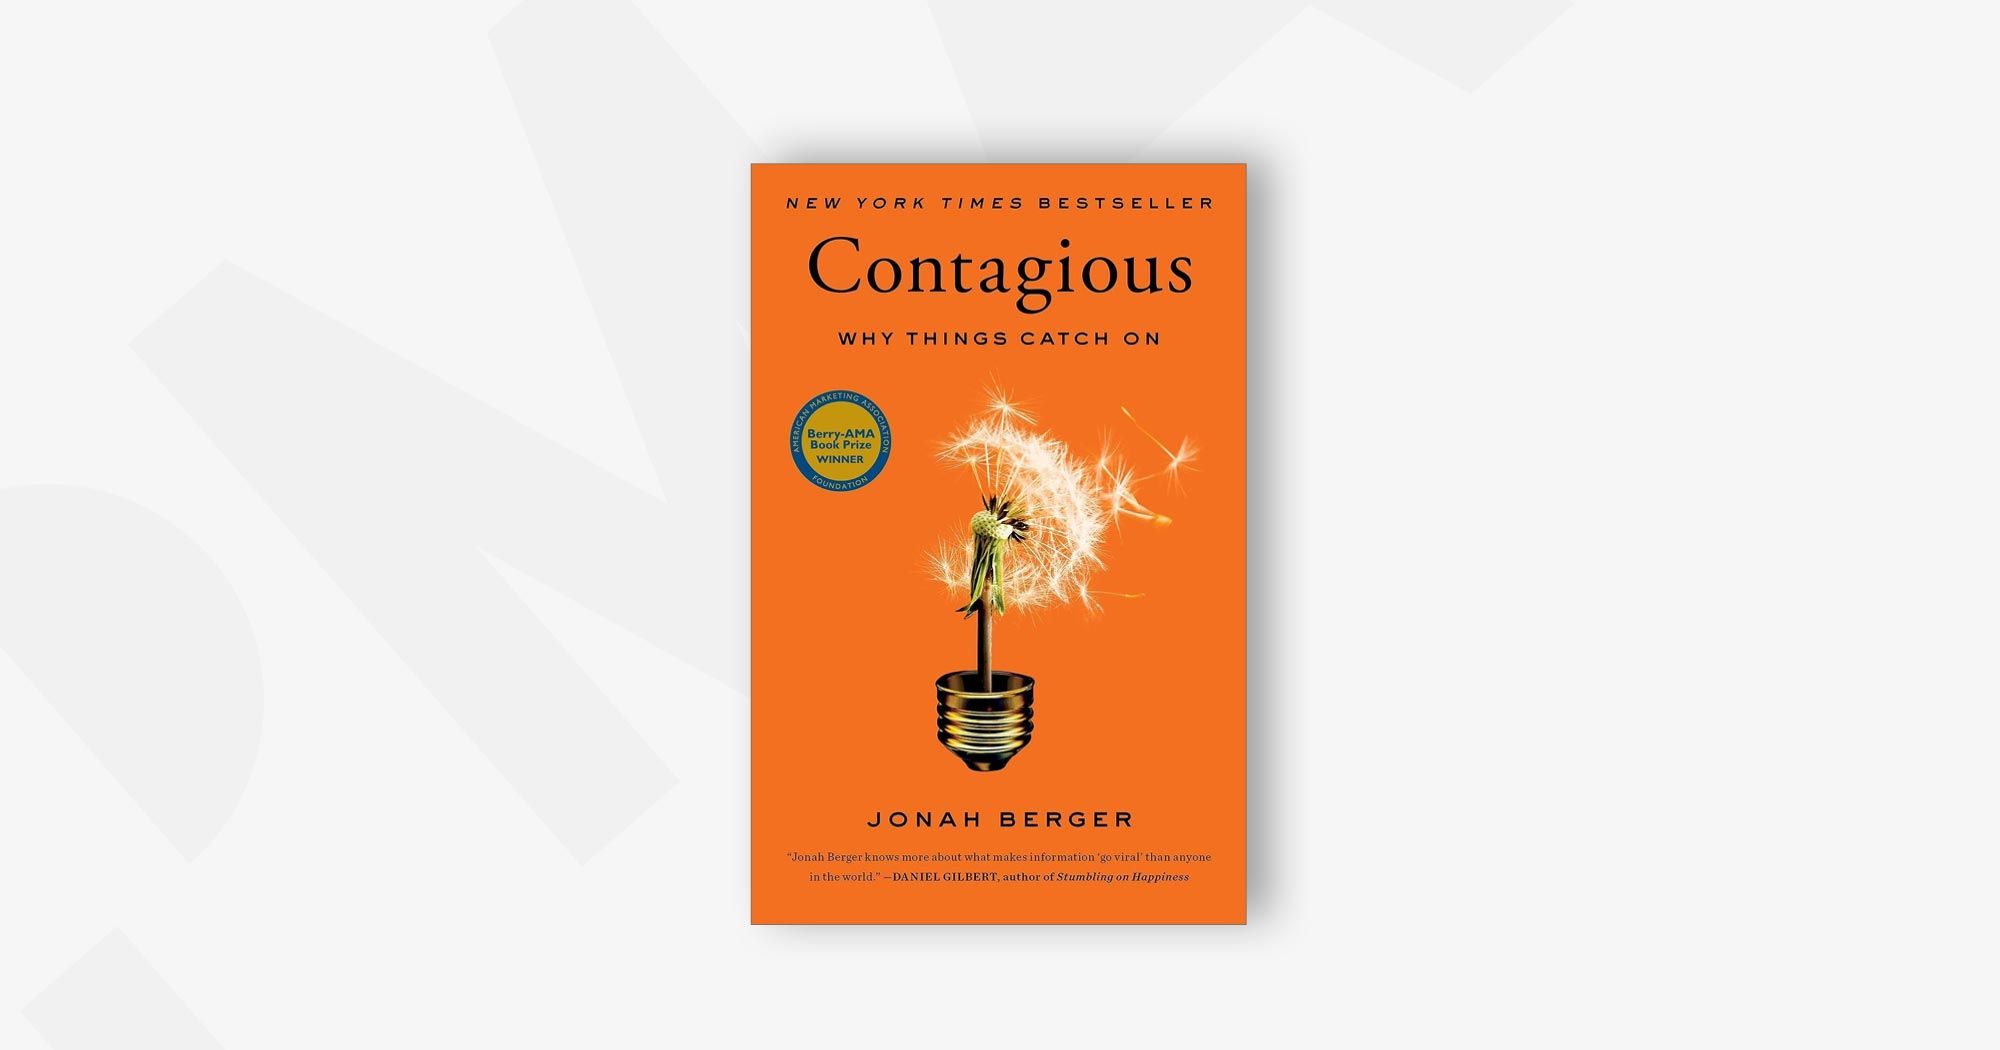 Contagious: Why Things Catch On – Jonah Berger